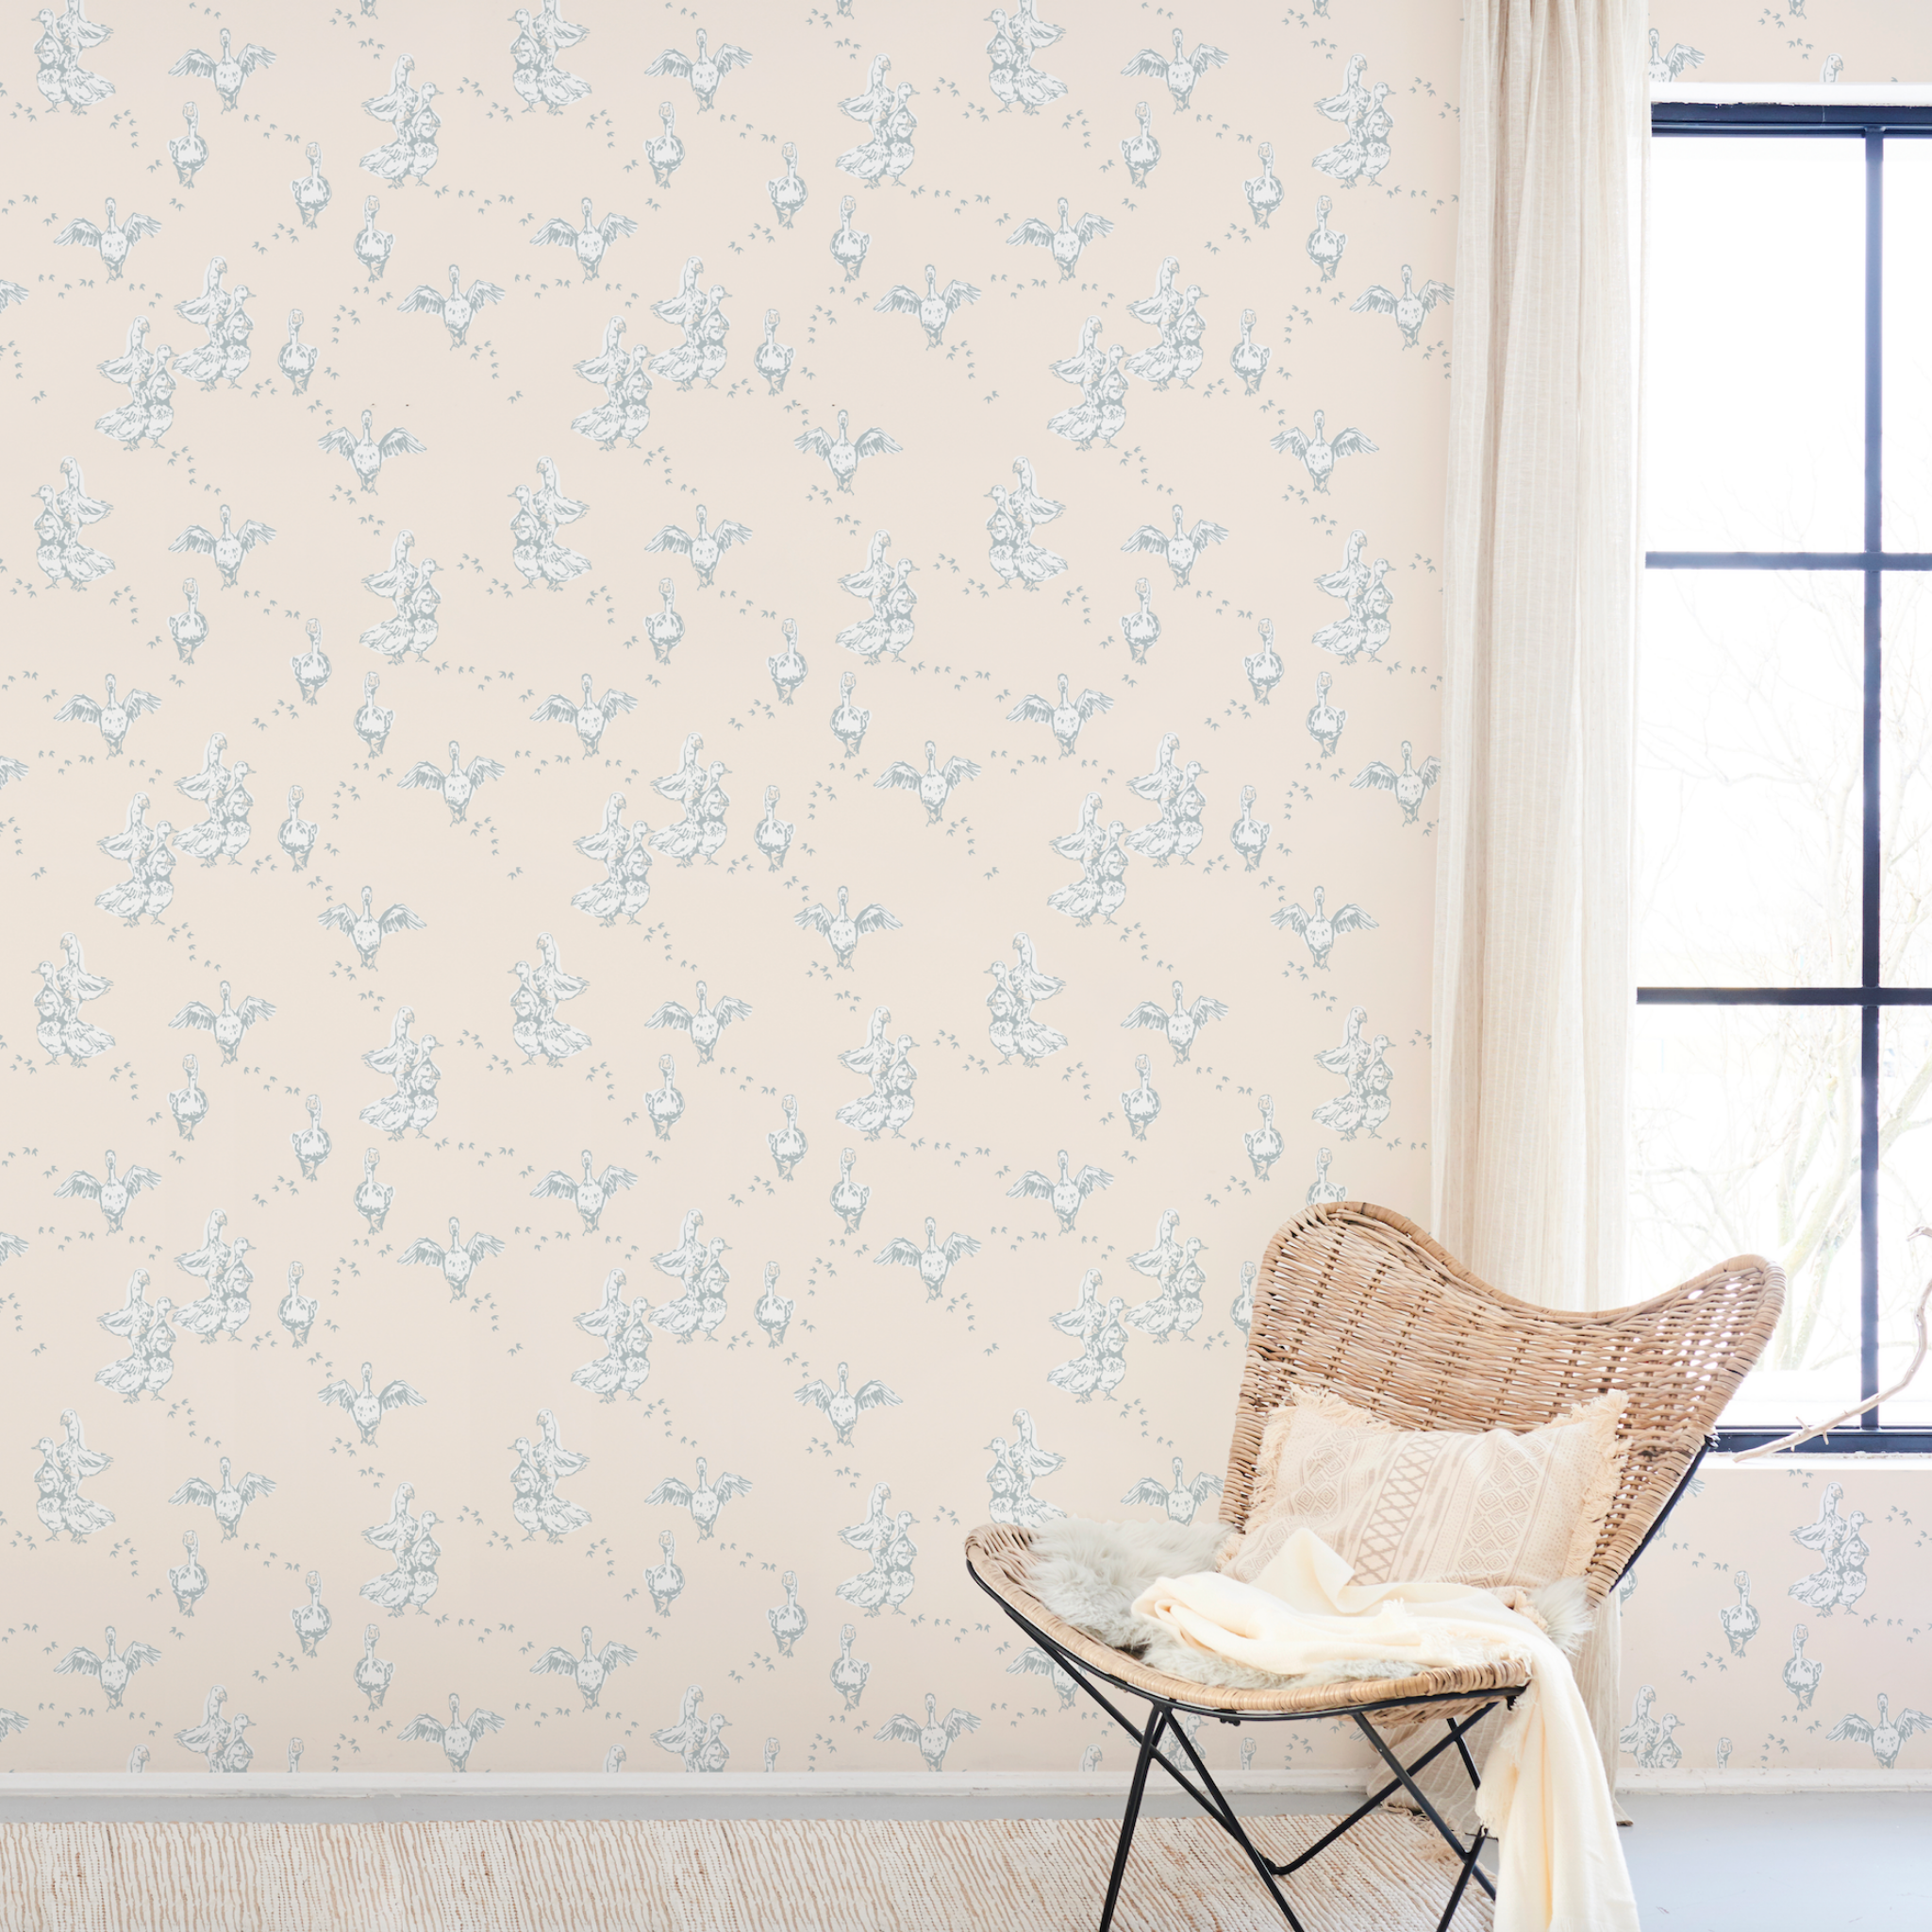 "Wall Blush's Abigail (Cream) Wallpaper in a cozy sunlit room with wicker chair accentuating the elegant decor."